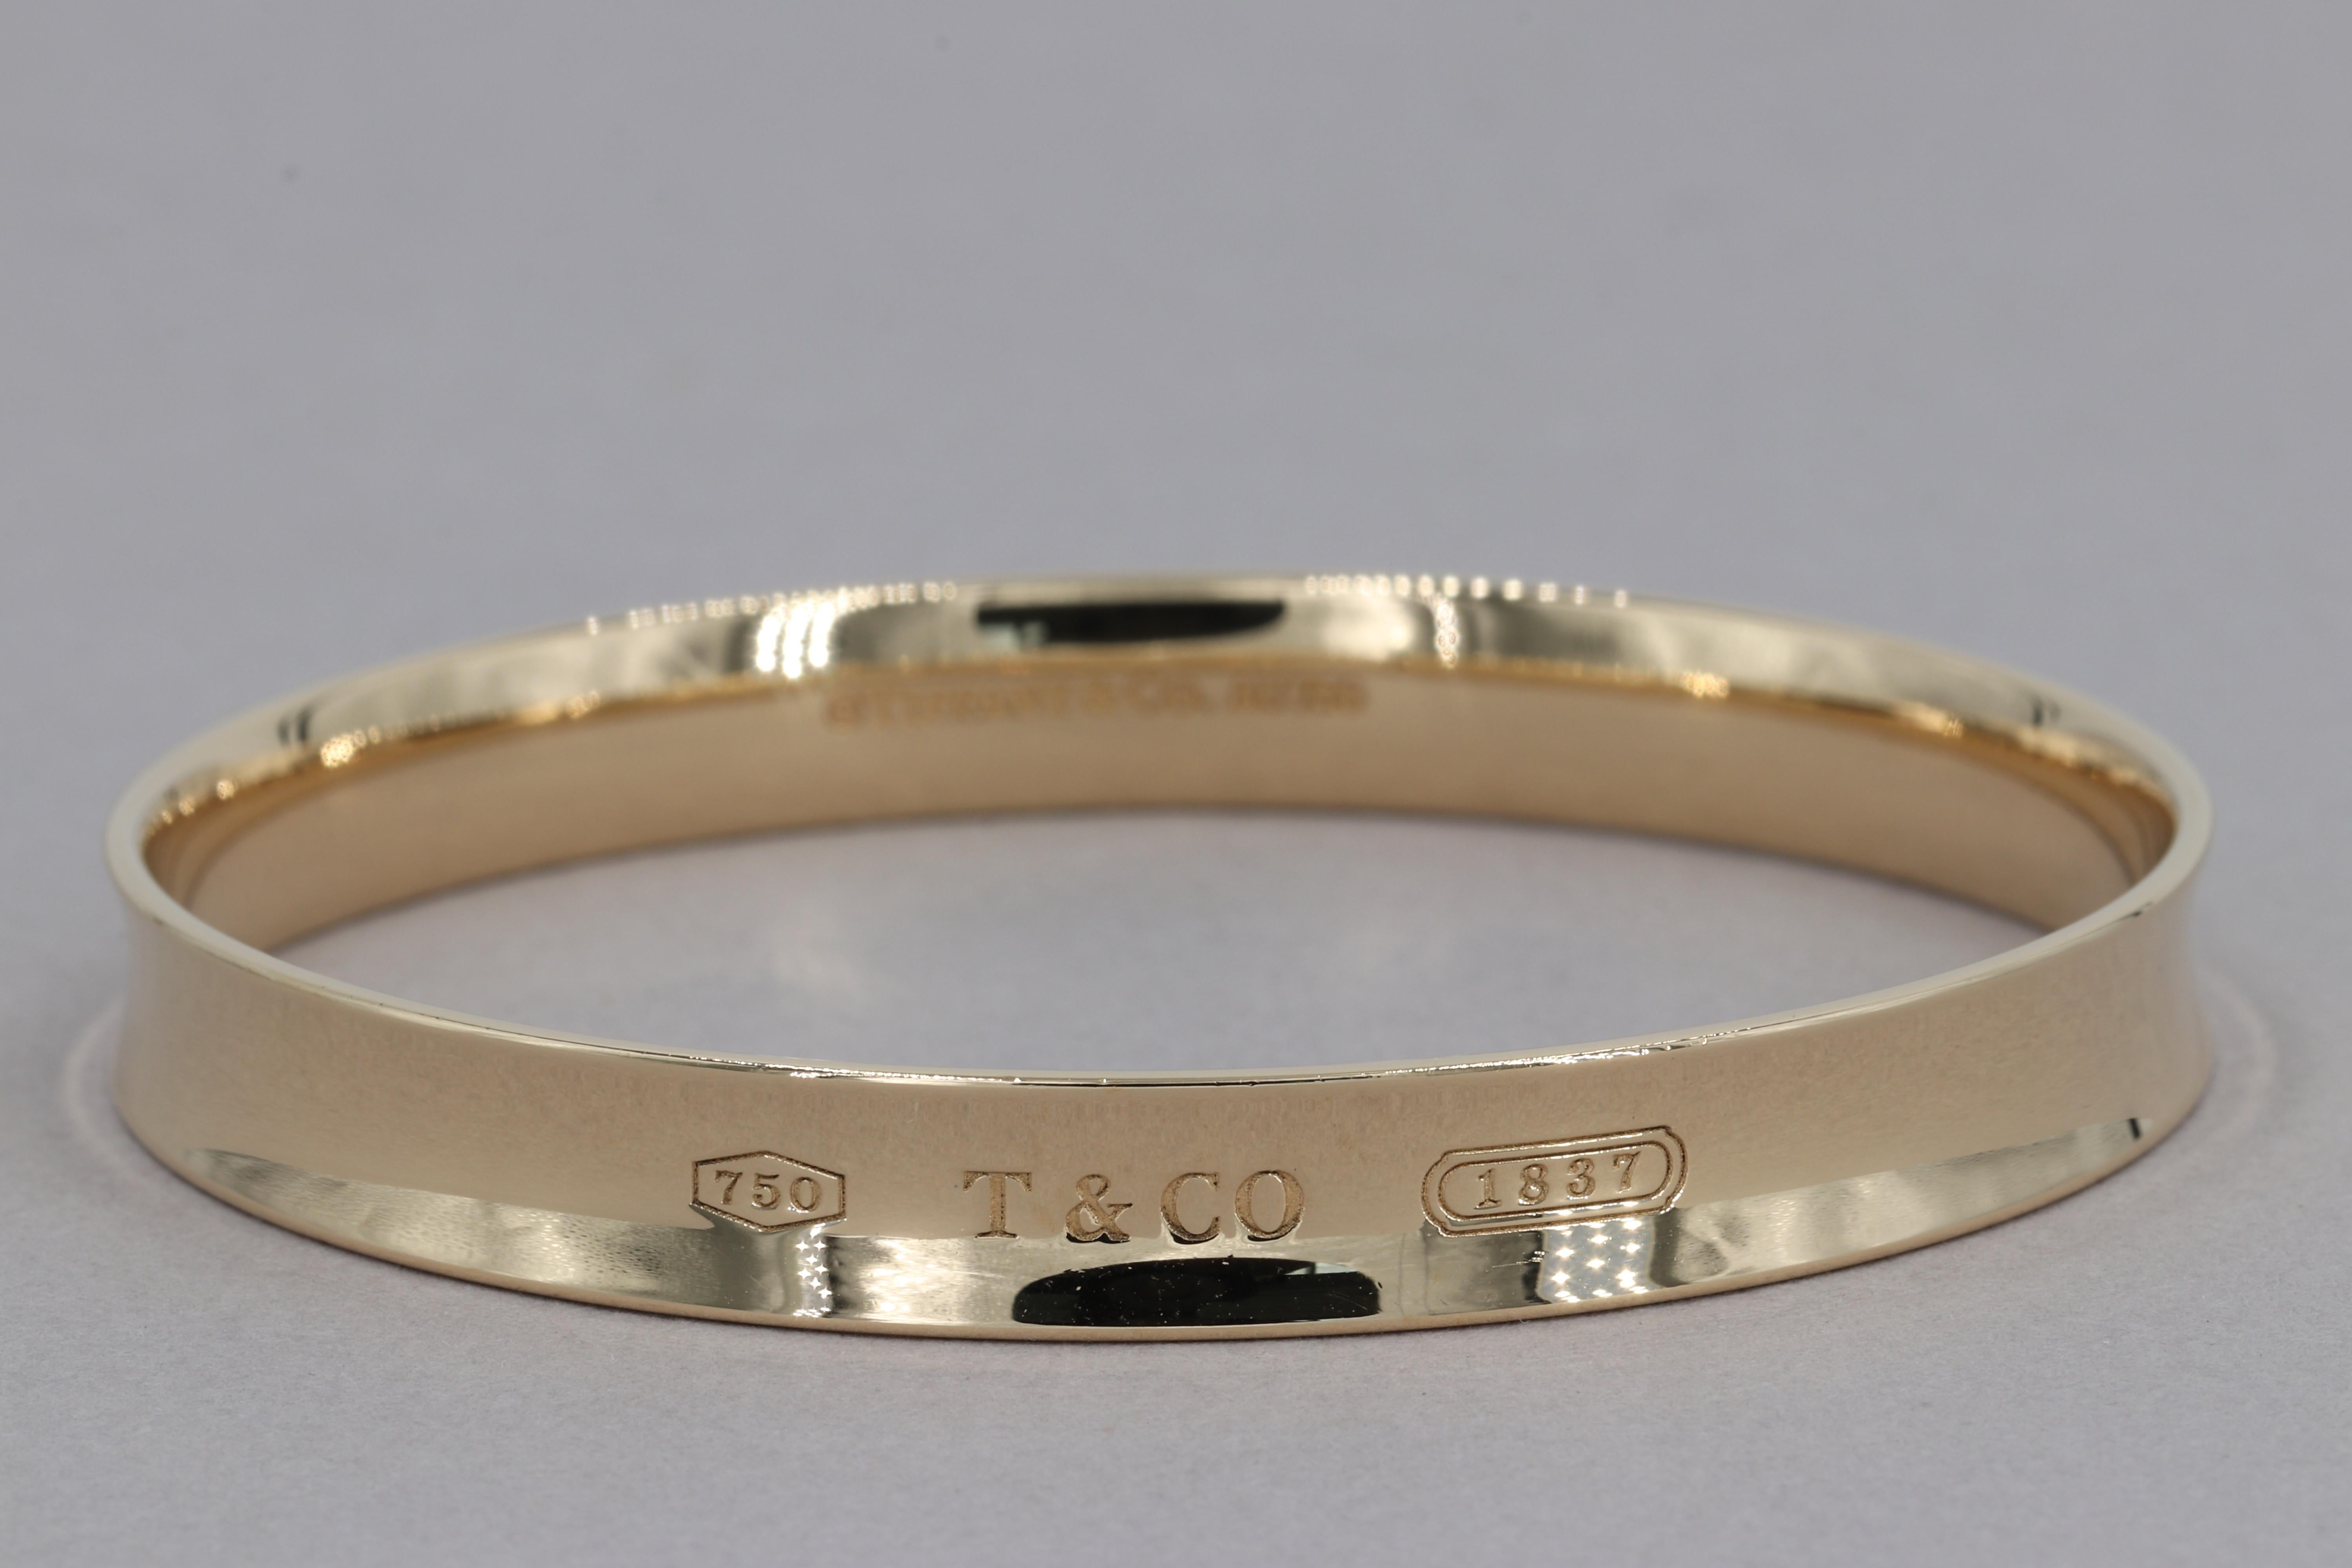 Tiffany & Co. 1837 Bangle Bracelet 8mm 18 Karat Yellow Gold 

Weight - Approximately 29.8 grams

Width - Approximately 8 mm

Height - Approximately 2.10 mm

Diameter - Approximately 2.5 inches - Translates to Approximately 7.85